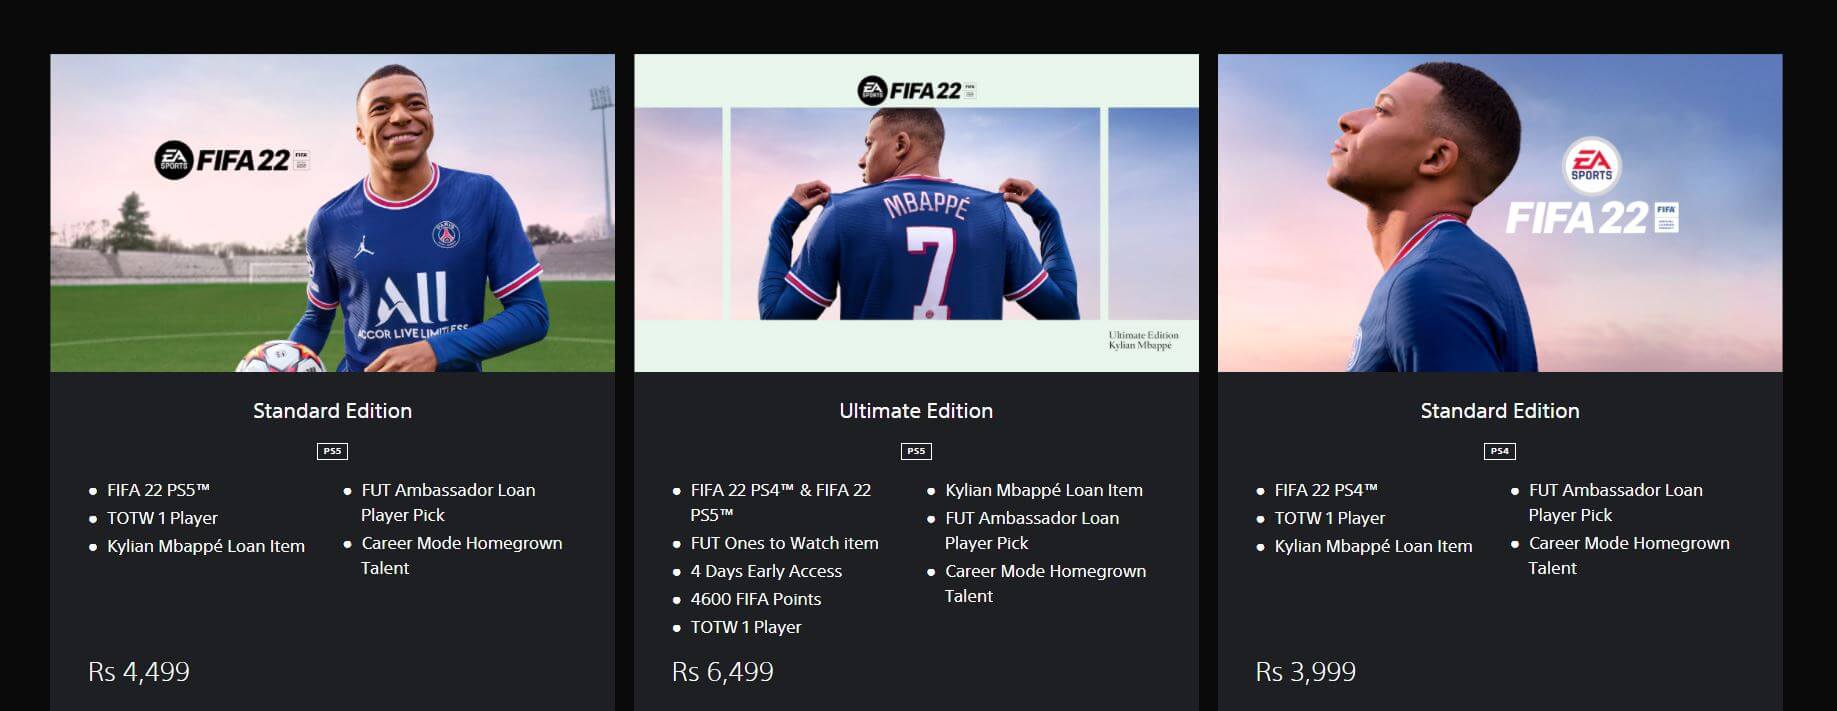 Fifa 22 Editions Features and Prices TechFoogle